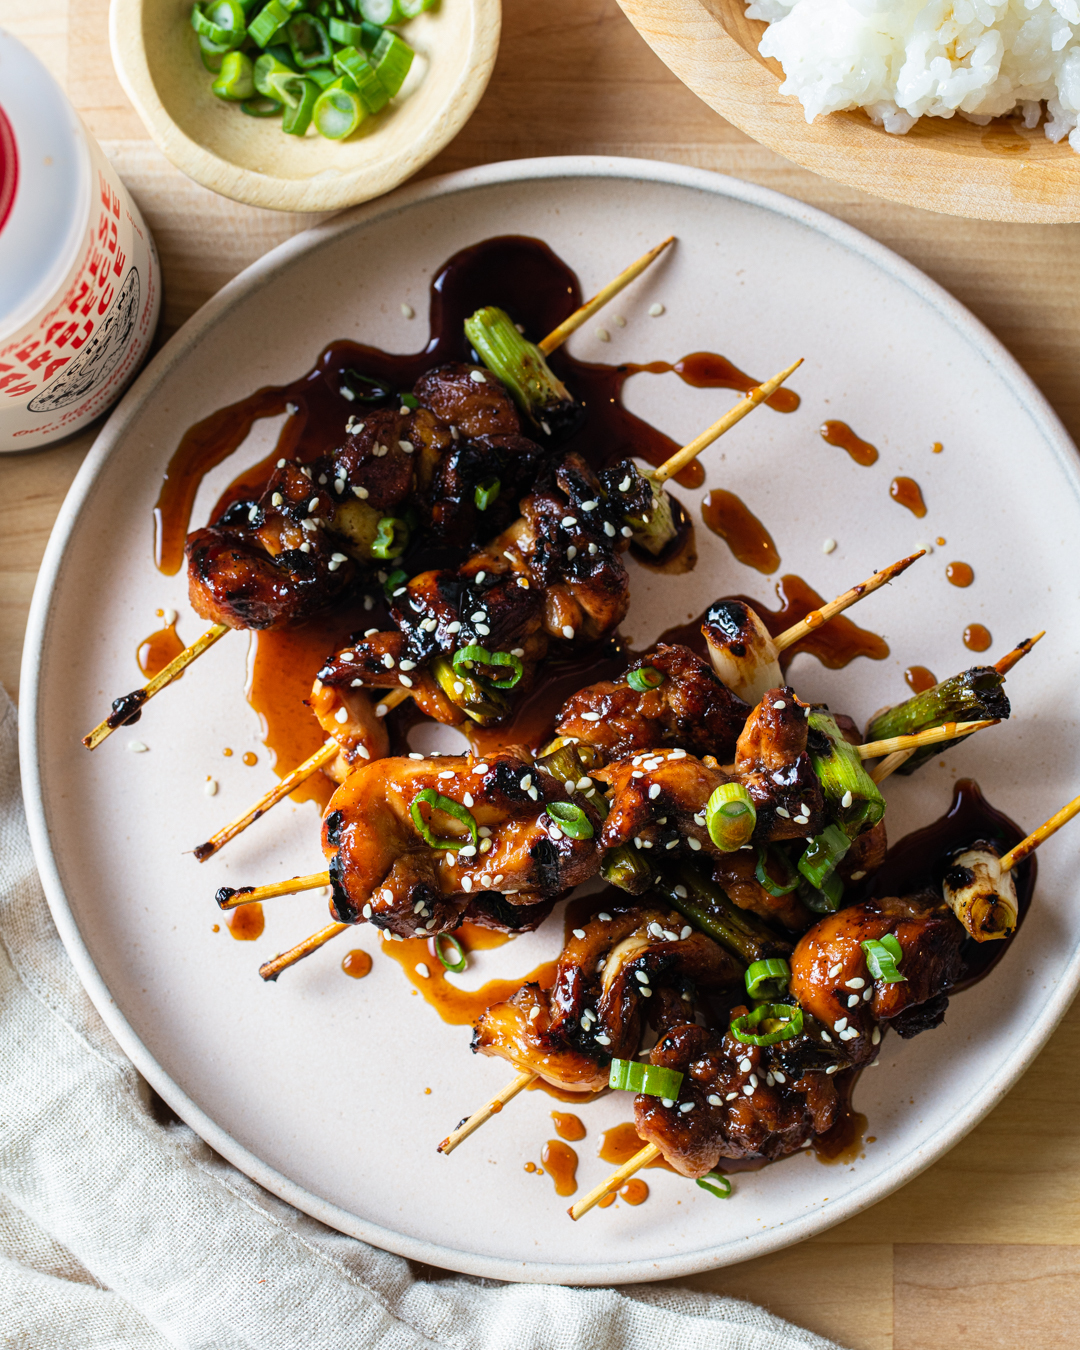 Chicken Skewers With Bachan’s Original Japanese BBQ Sauce